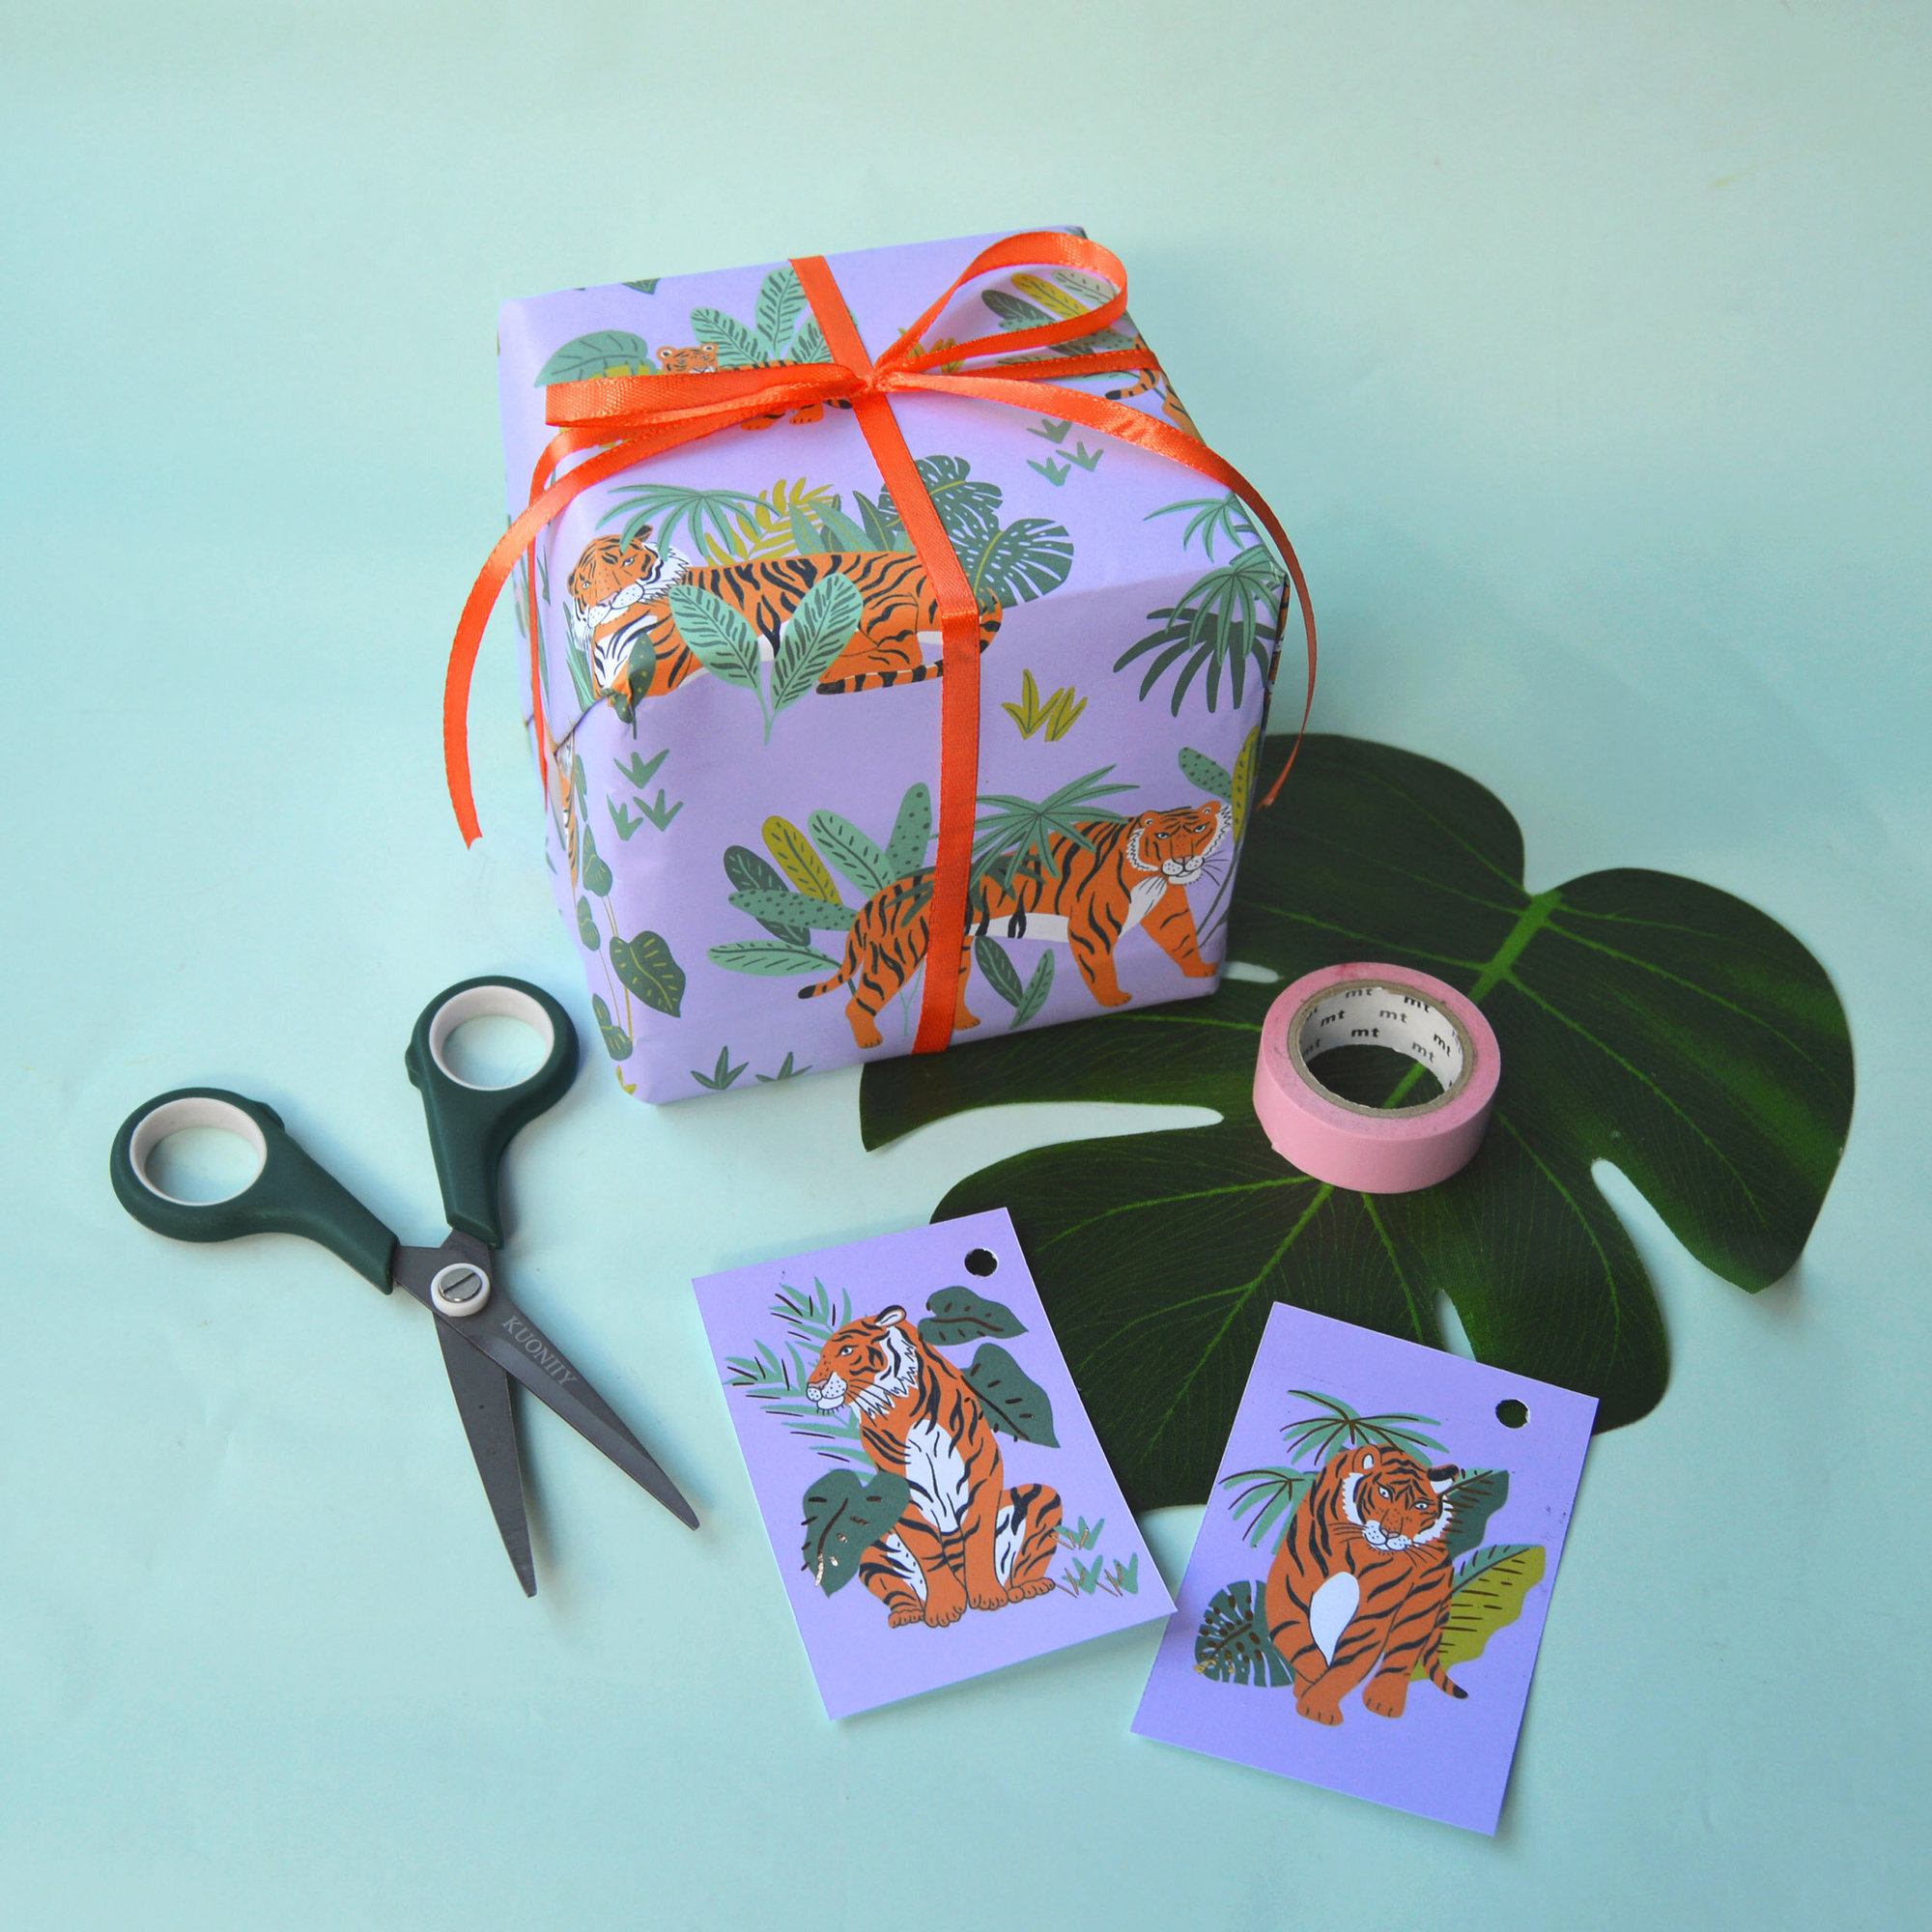 Jungle Tigers Wrapping Paper - Just the wrap